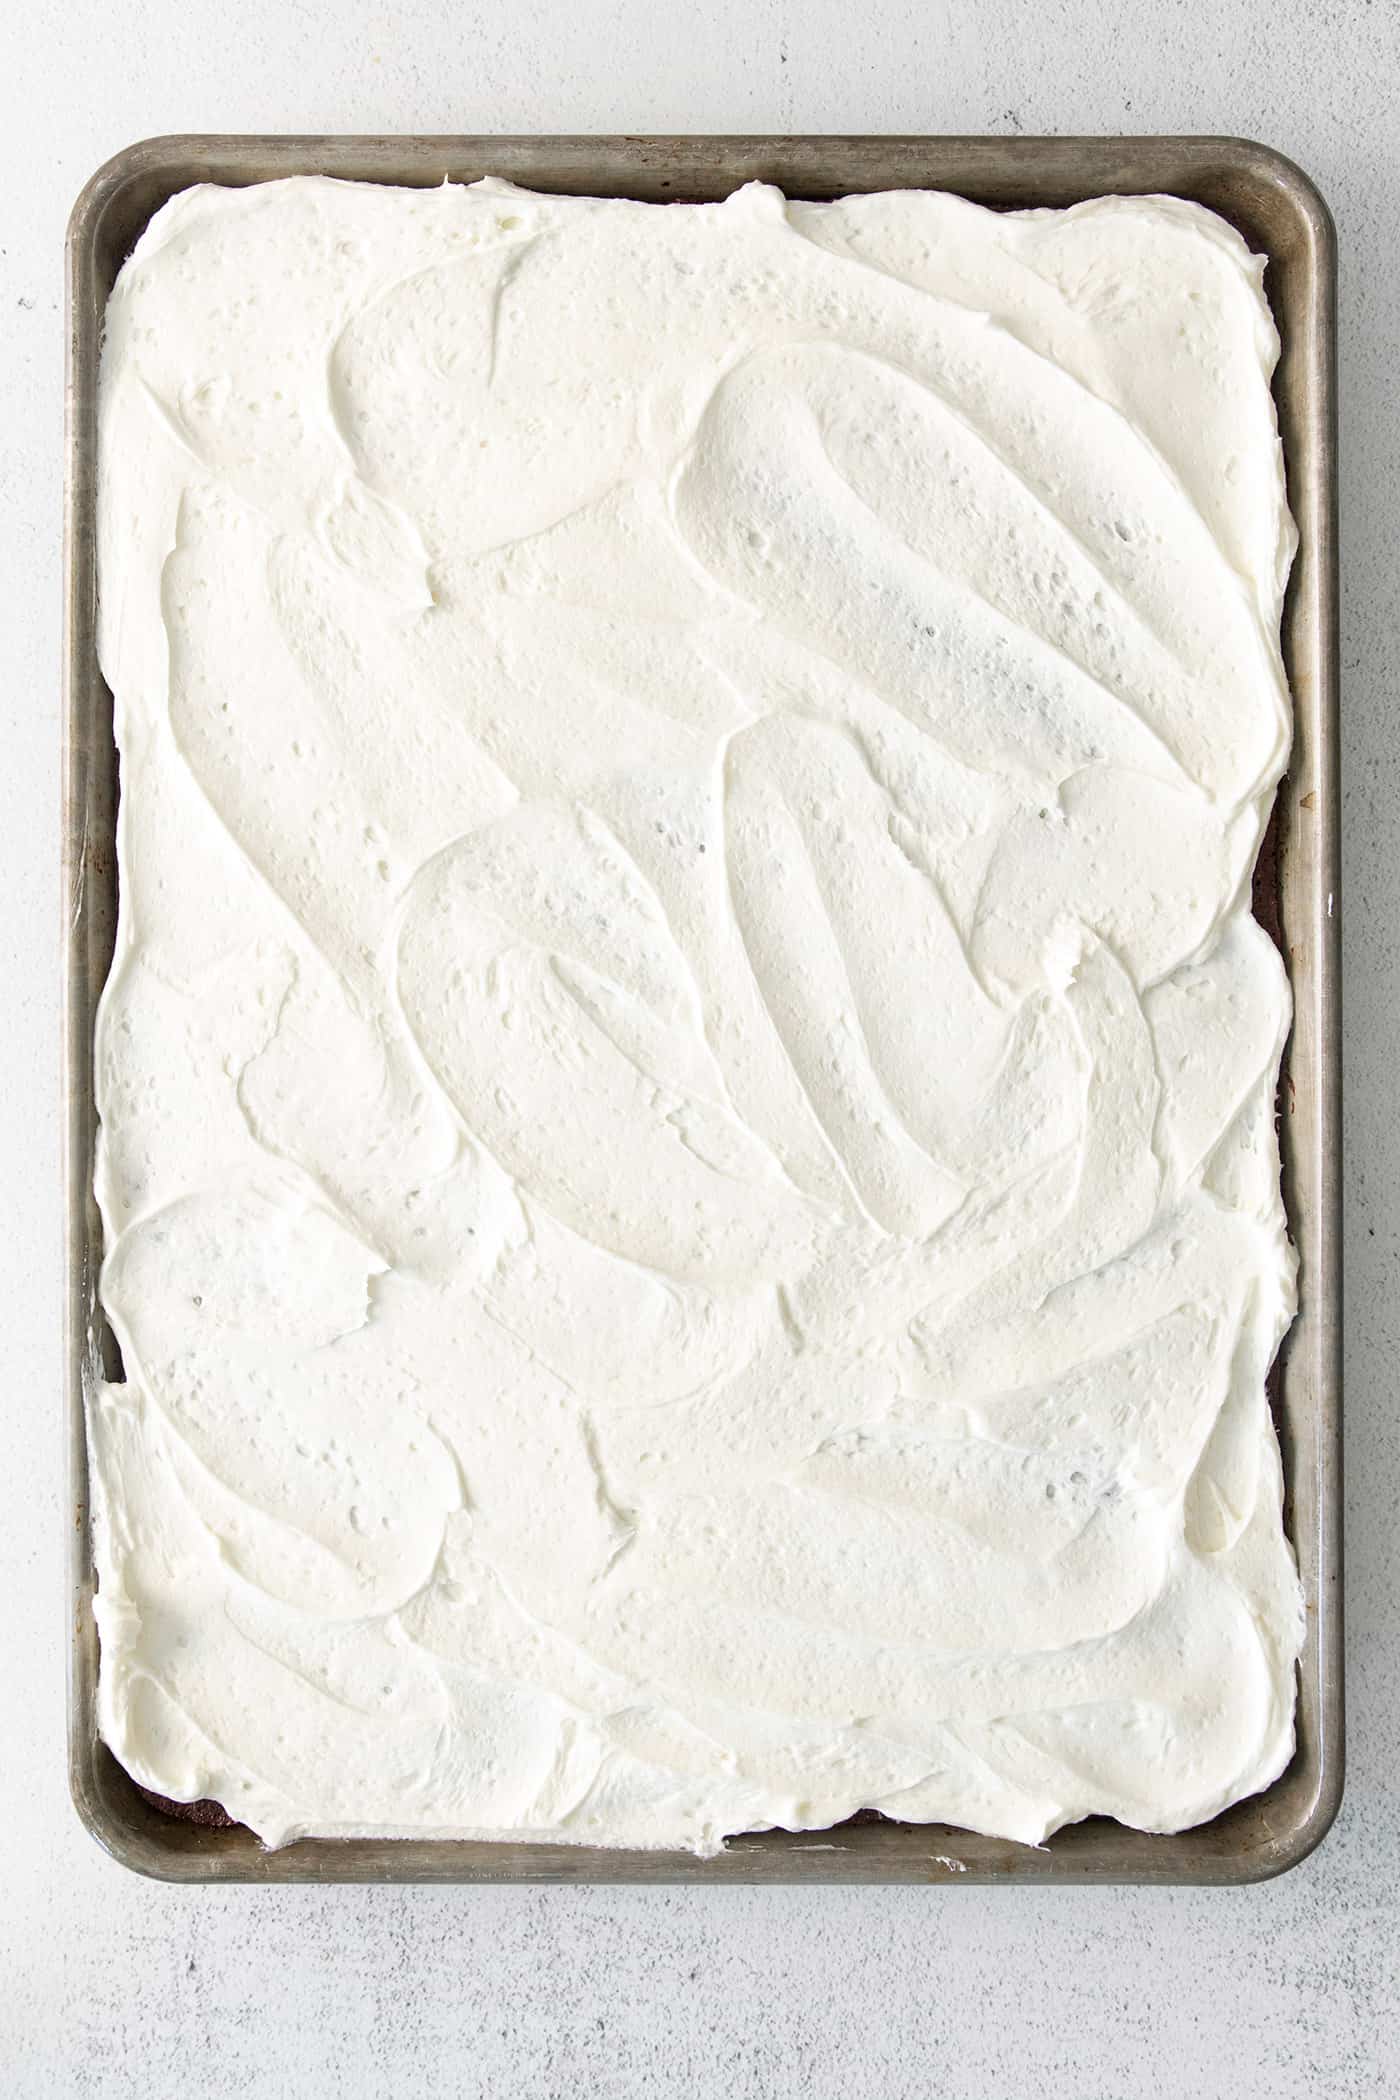 Cream cheese frosting spread on a sheet cake